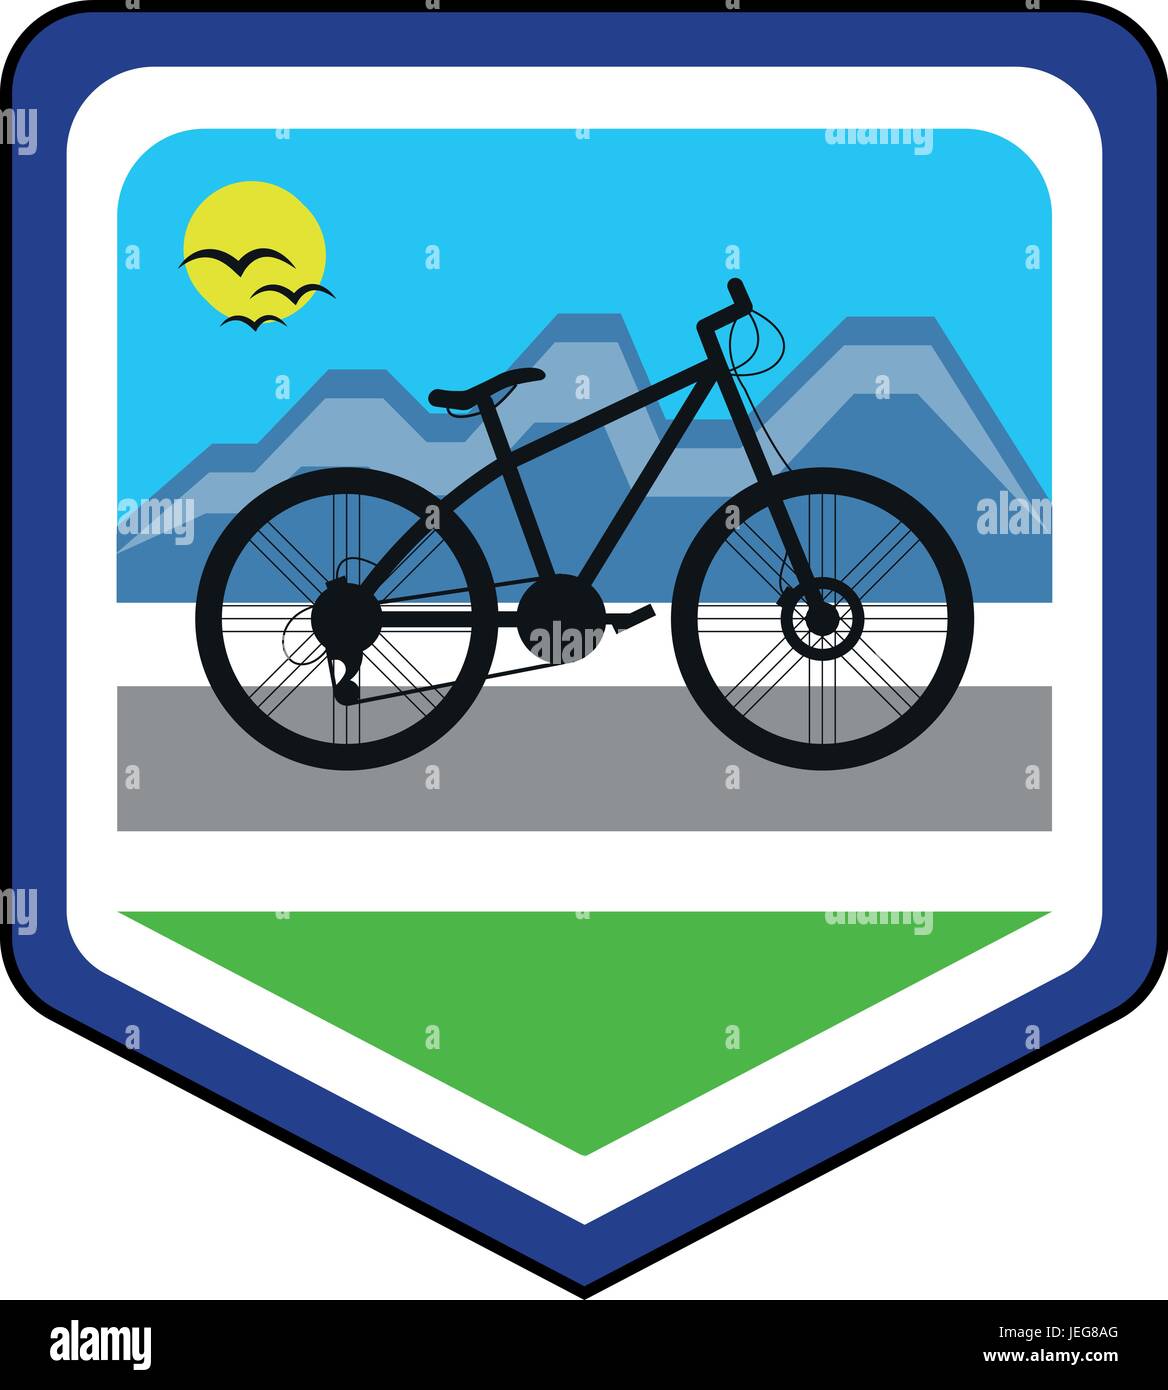 The cycling community logo. This is the vector illustration. Stock Vector